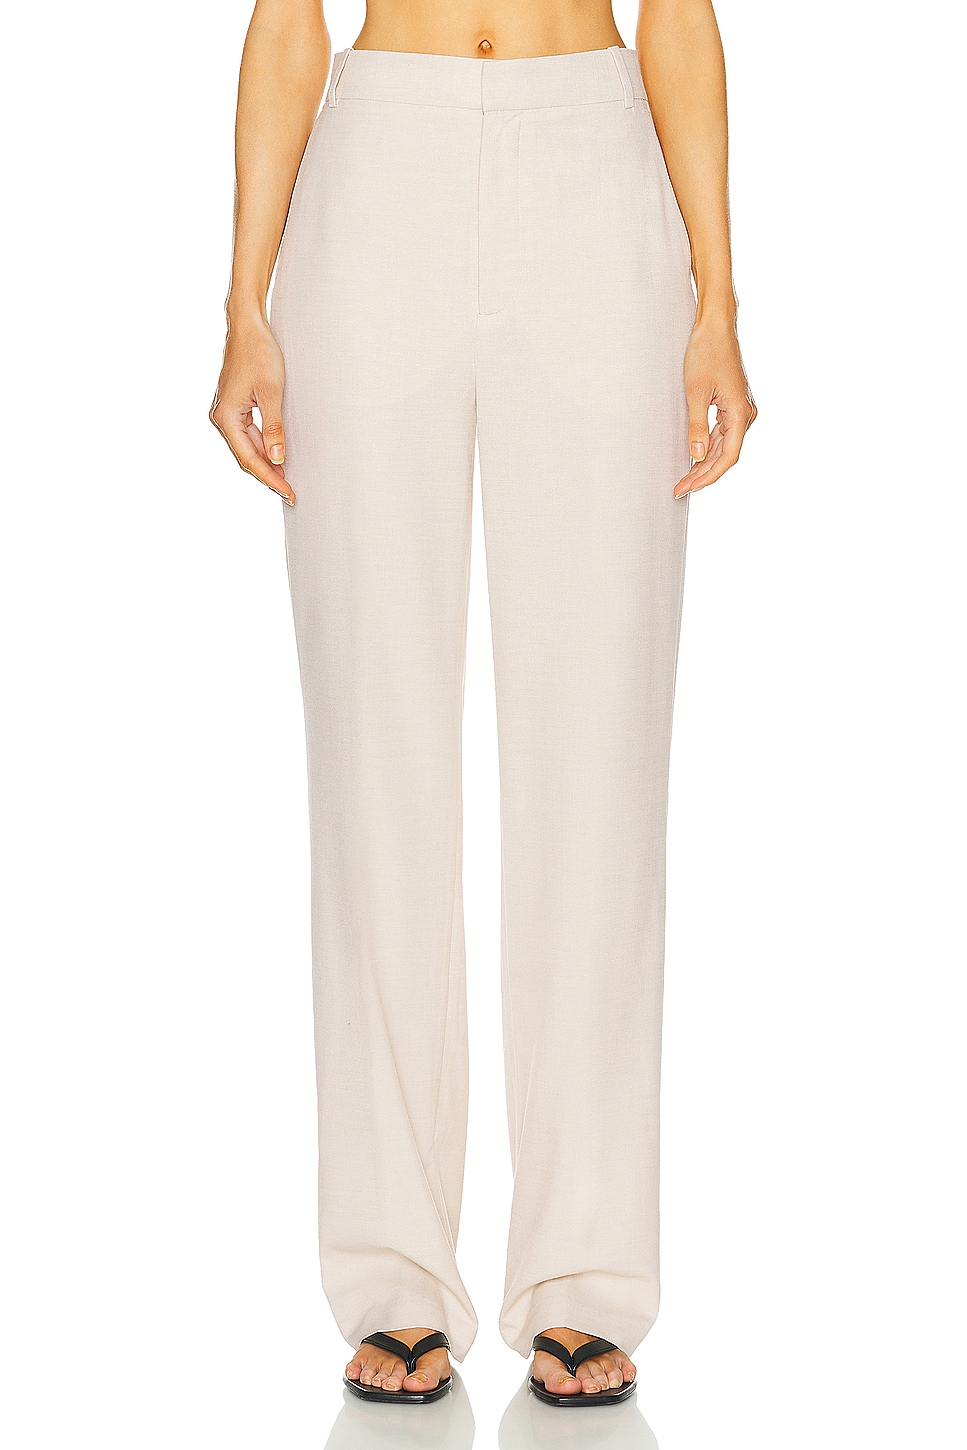 Image 1 of L'Academie by Marianna Hendry Trouser in Beige